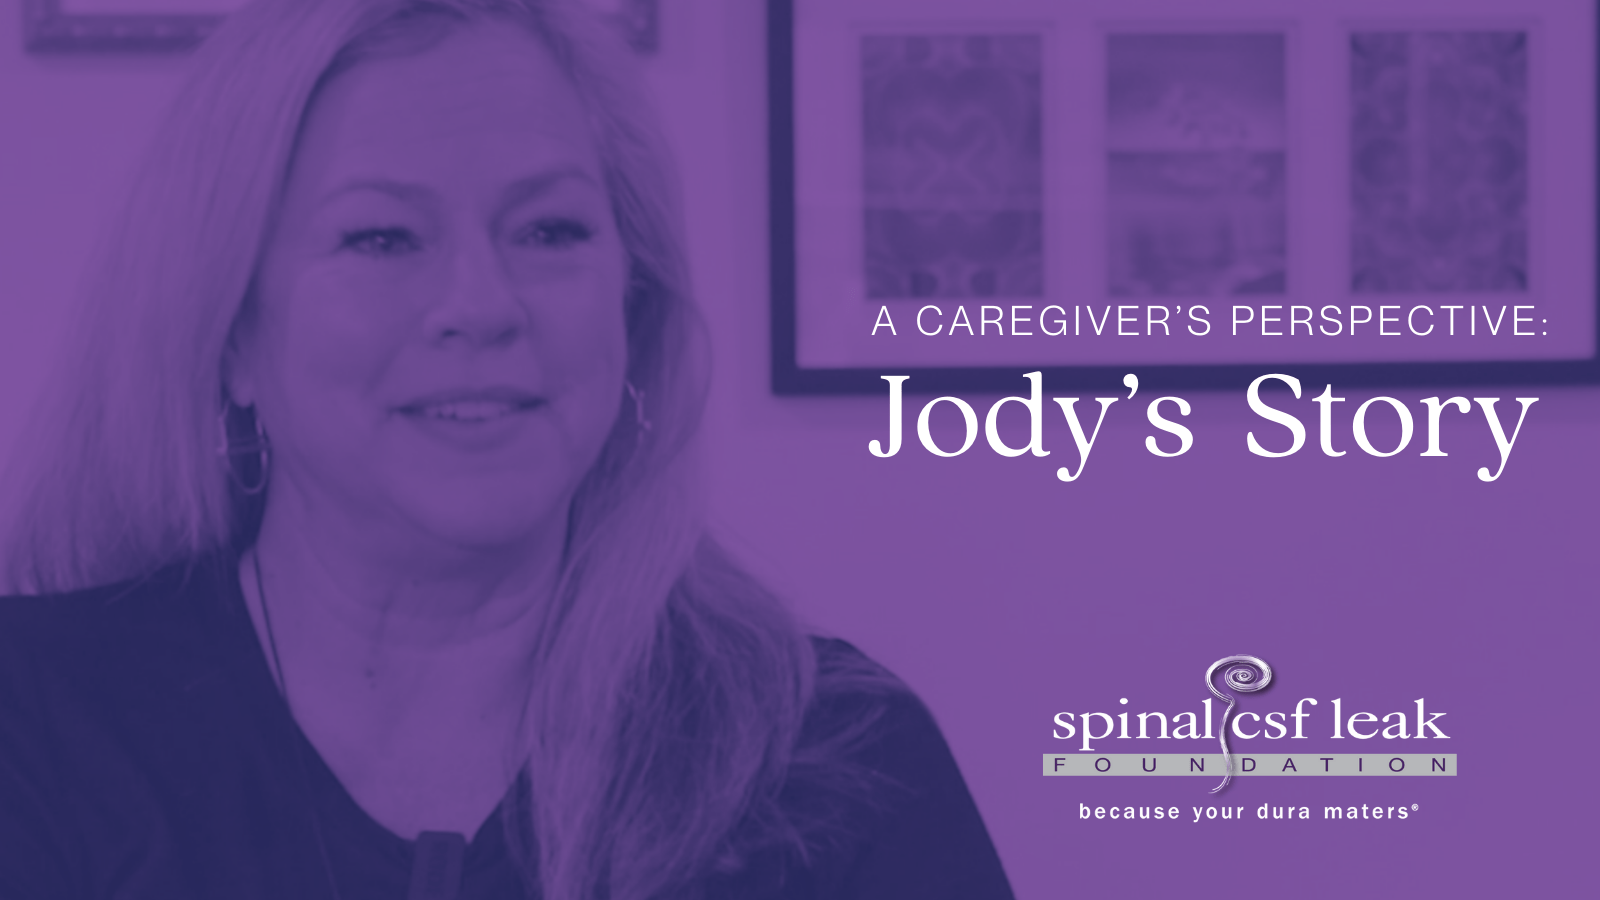 A Caregiver’s Perspective: Jody’s story